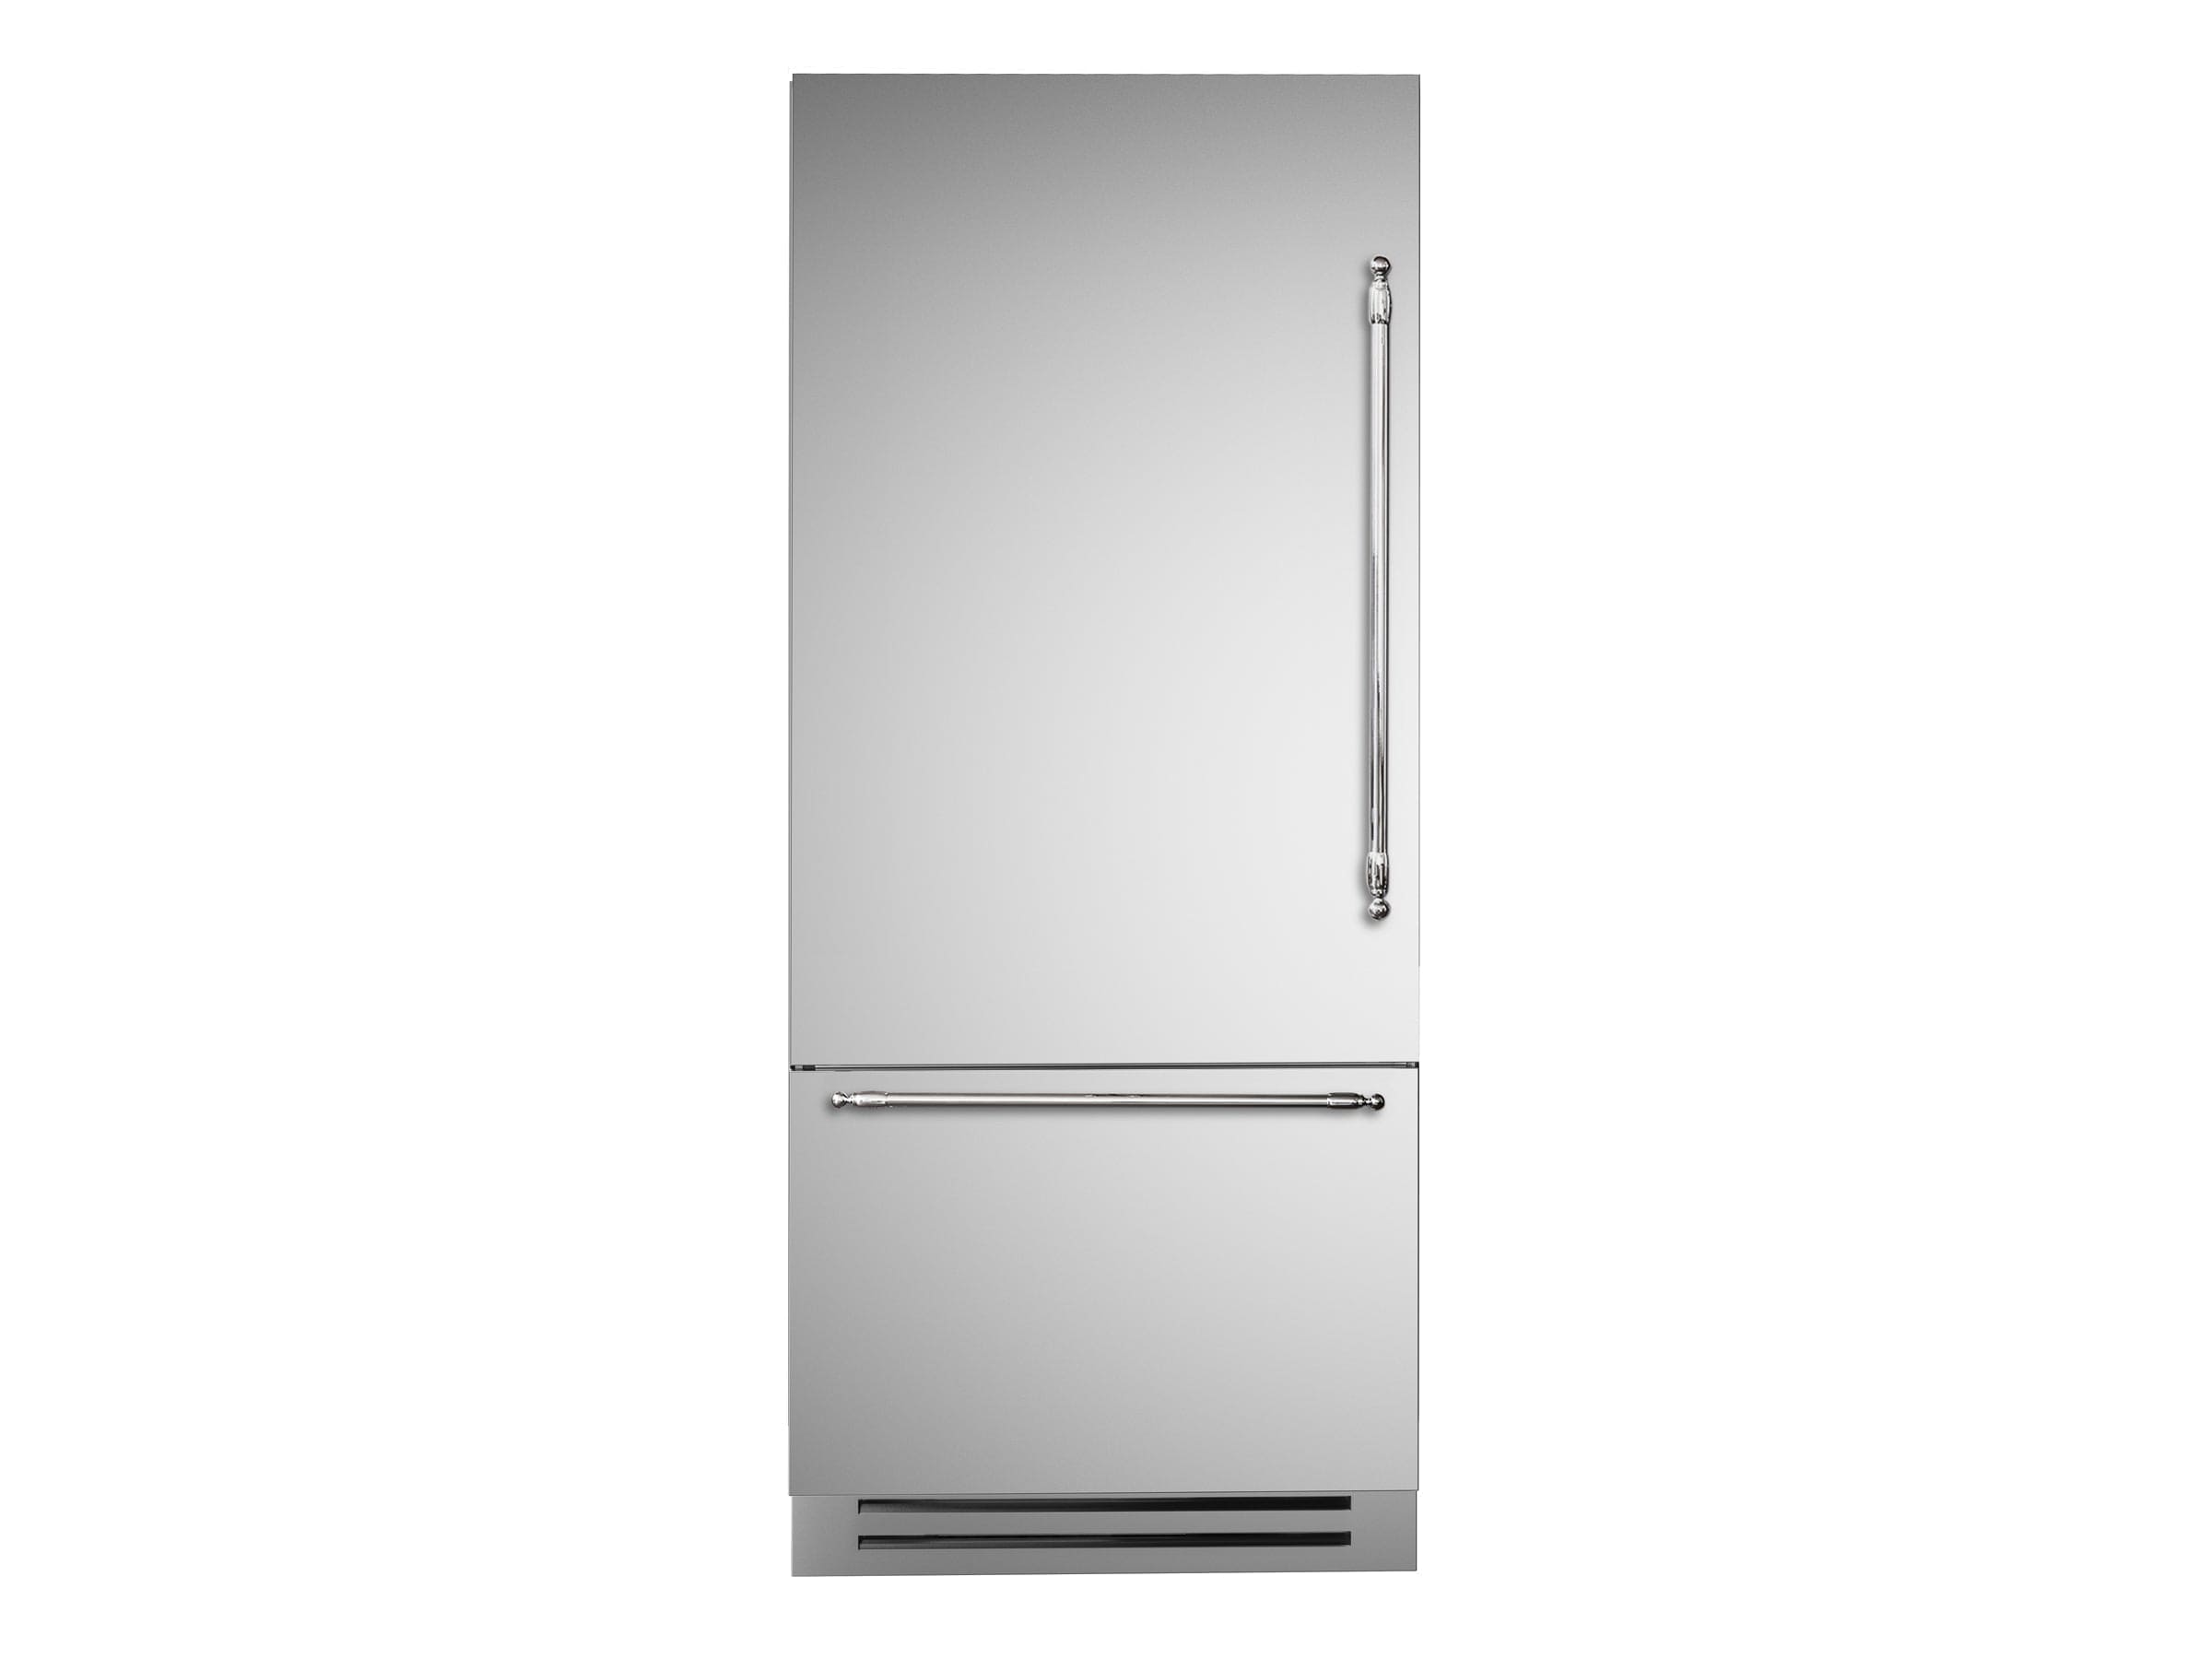 Bertazzoni 36" 19.6 Cu.Ft. Stainless Steel Built-In Bottom Mount Refrigerator With Ice Maker and Left Swing Door REF36BMBIXLT Luxury Appliances Direct